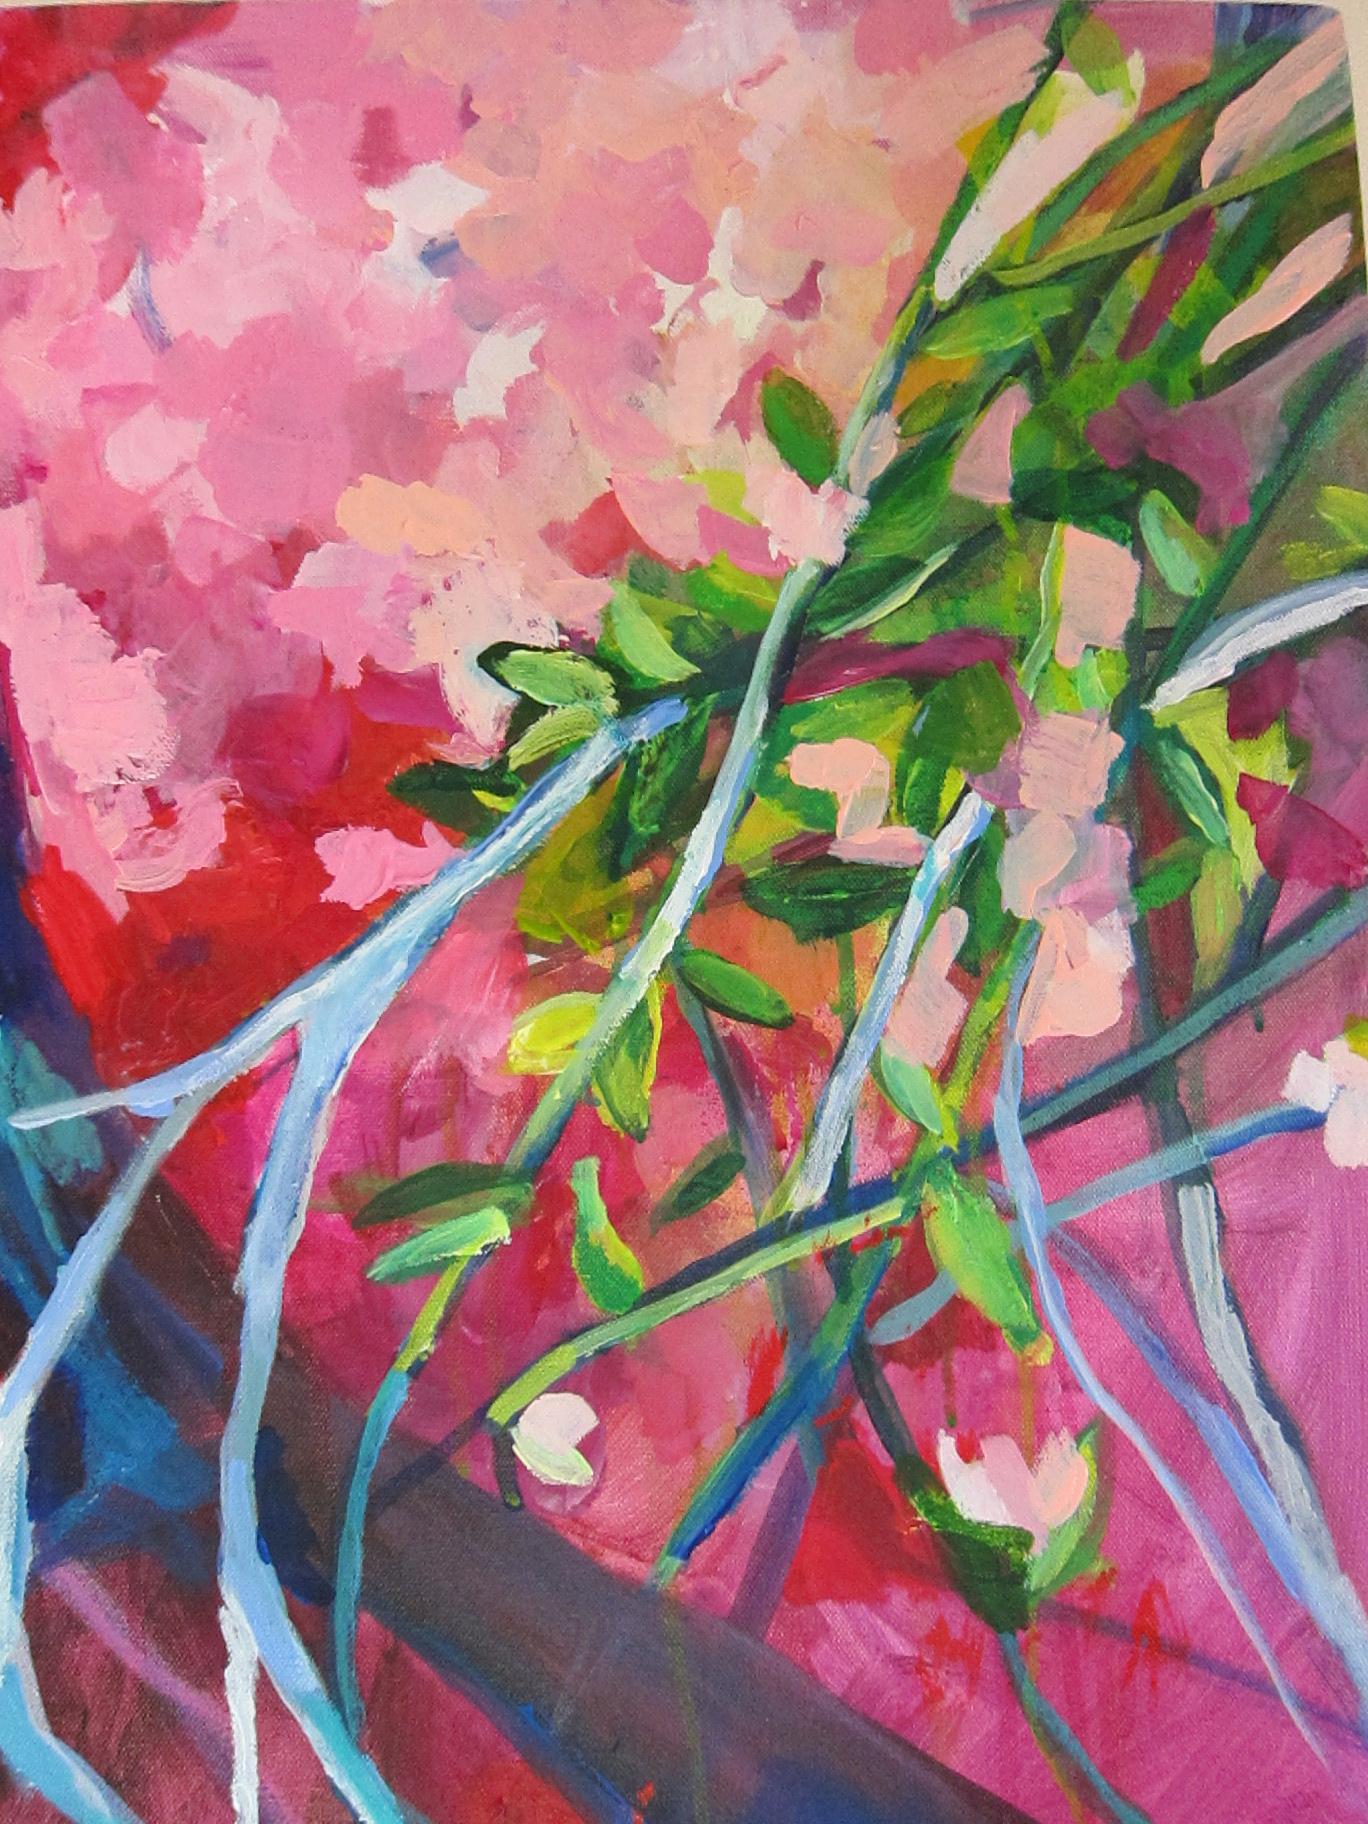 Medley of Blossoms - Pink Still-Life Painting by Colette Wirz Nauke